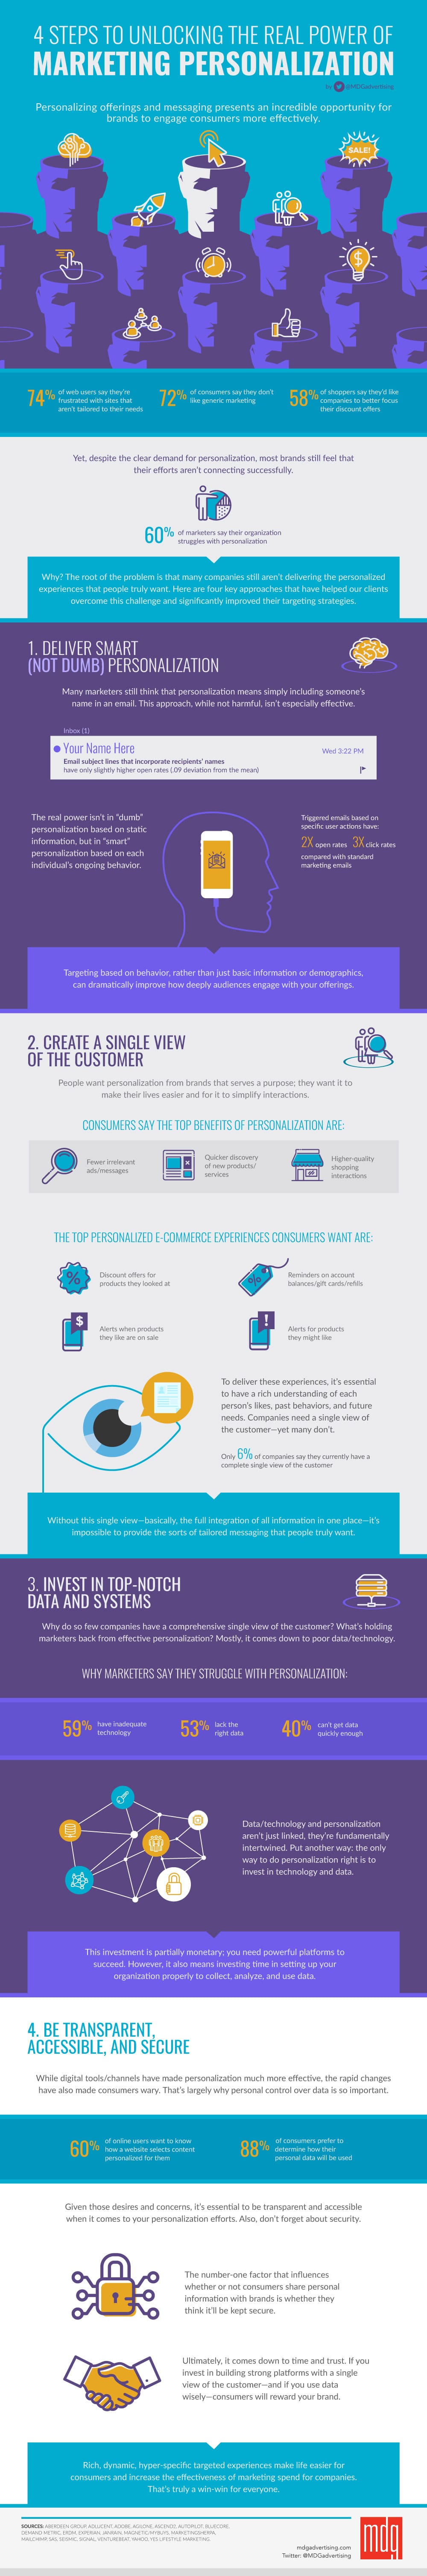 Marketing Personalization Steps Guide Infographic